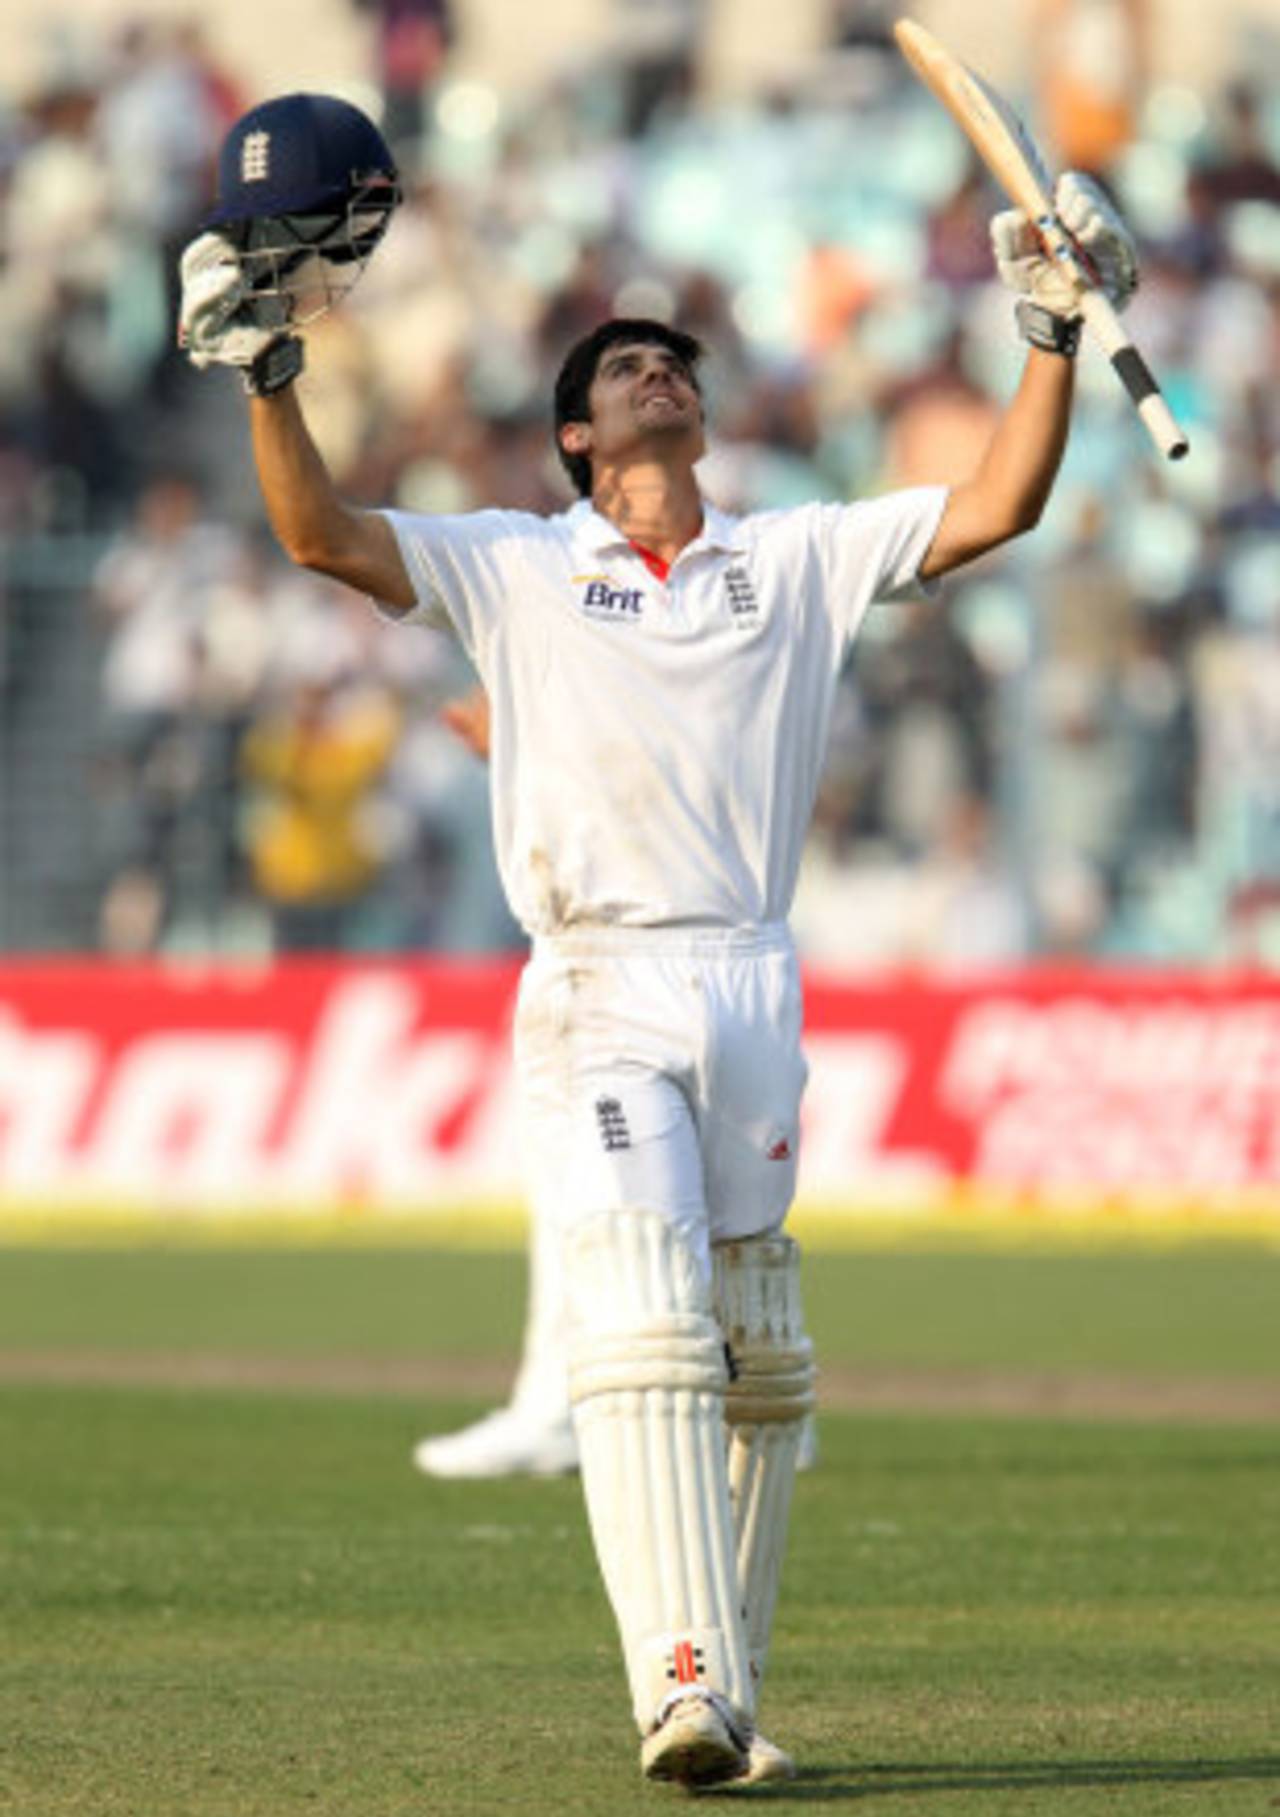 Alastair Cook went on to make his 23rd Test century - the most for England, India v England, 3rd Test, Kolkata, 2nd day, December 6, 2012